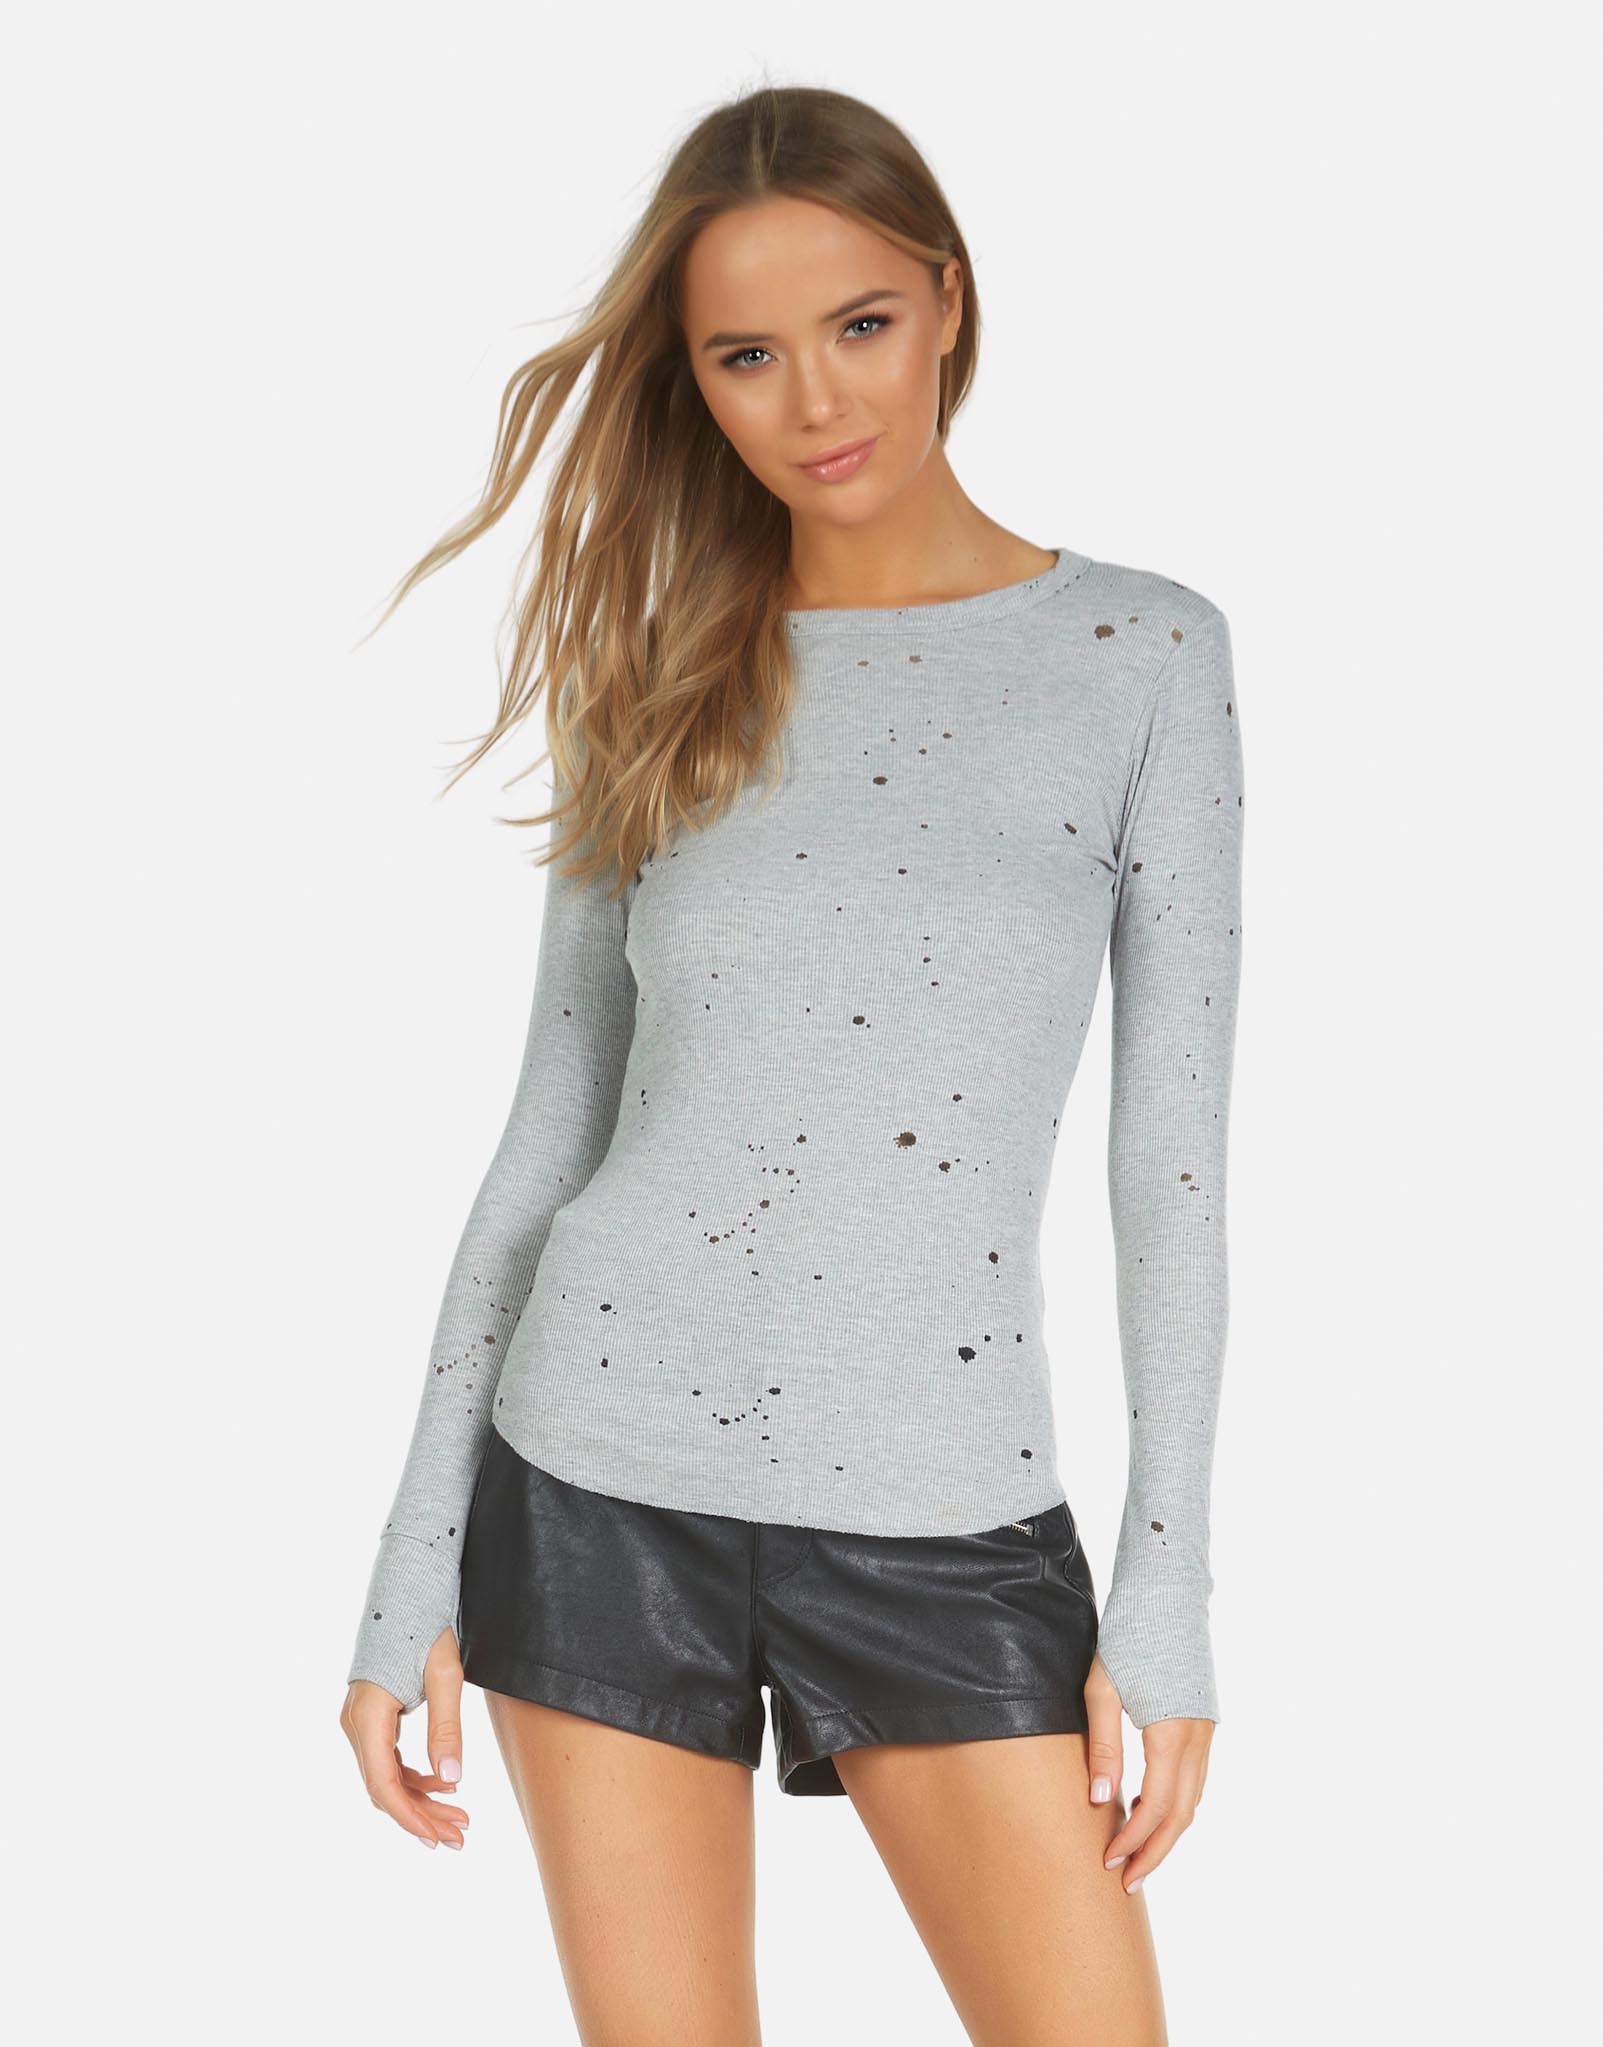 Mathis Fitted Top - Heather Grey XS